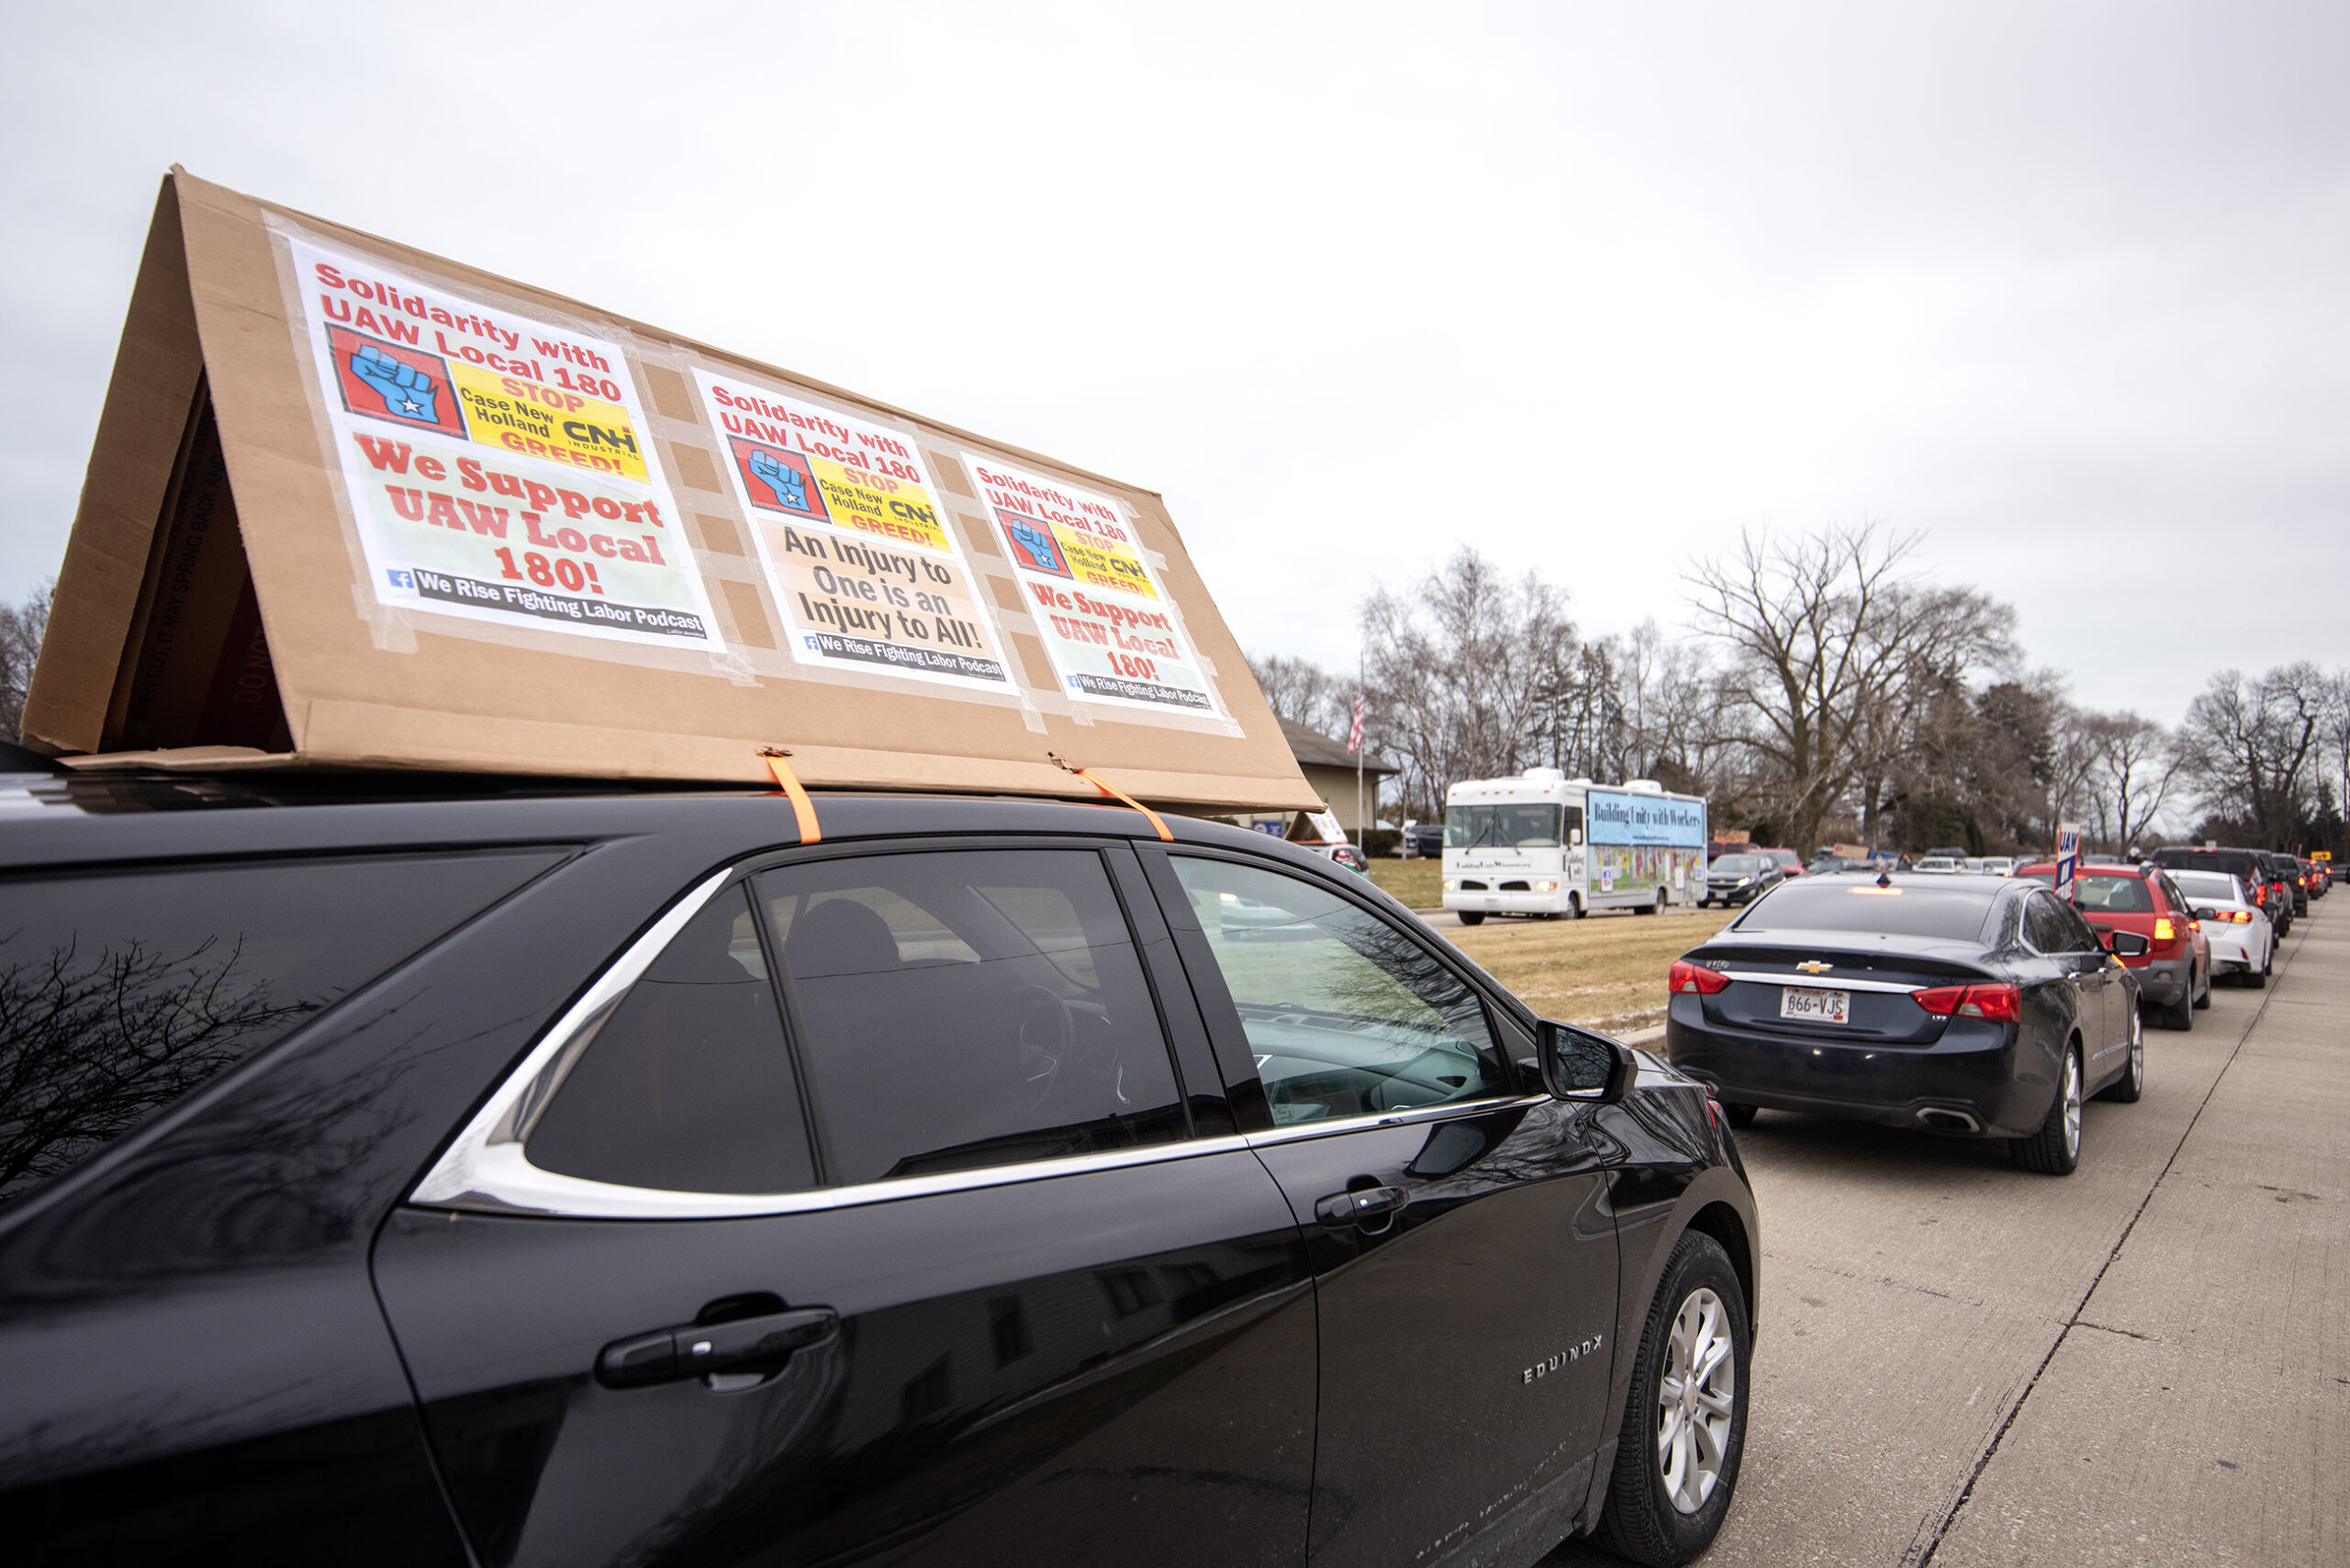 A cardboard sign is affixed to the top of a black car. Three signs in support of the union efforts are attached.